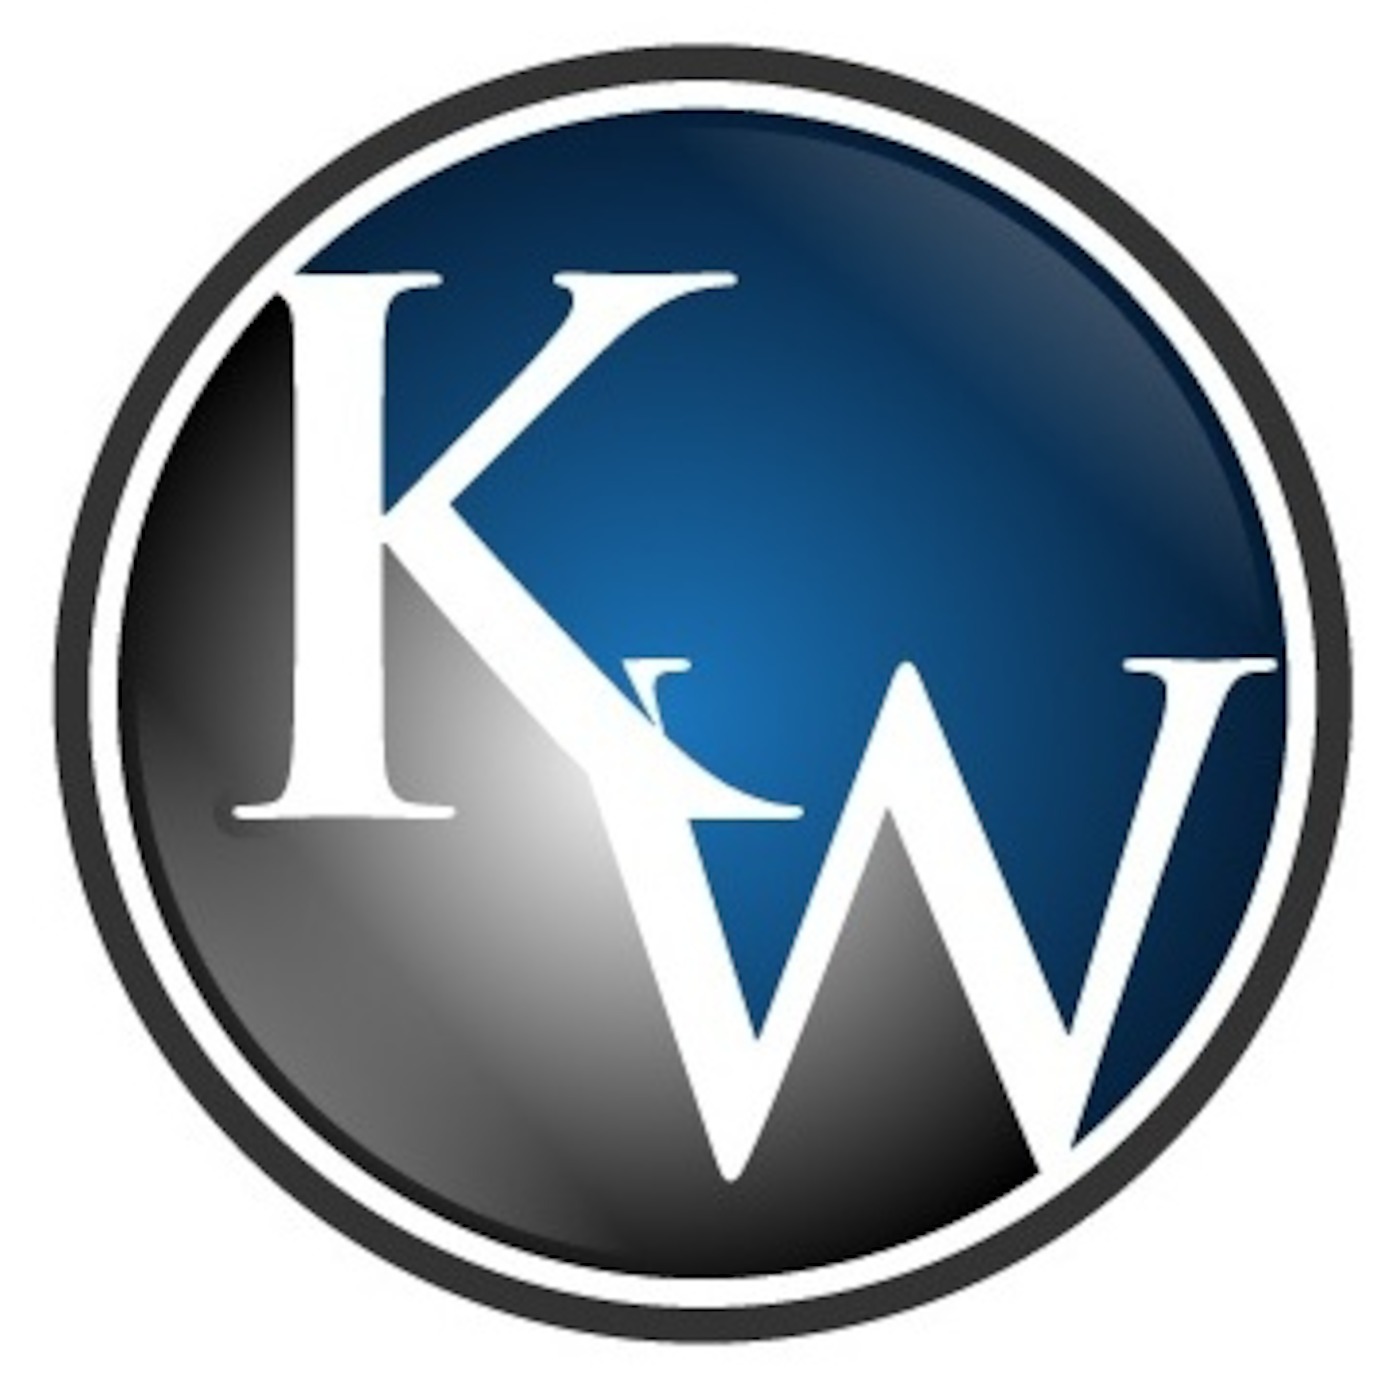 Kevin West Ministries